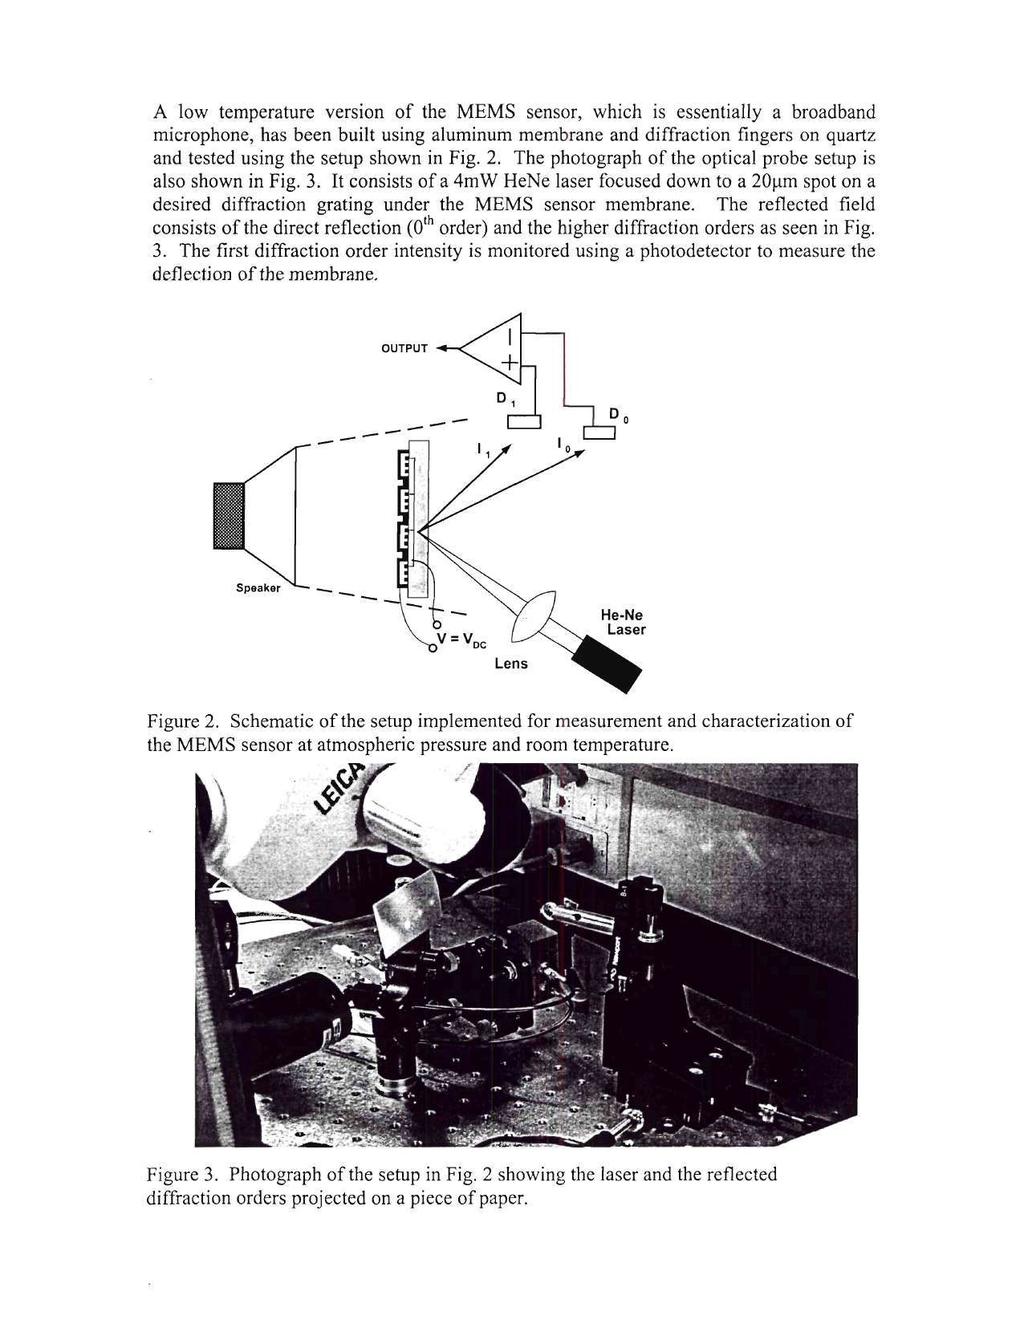 microphone, has been built using aluminum membrane and diffraction fingers on quartz and tested using the setup shown in Fig. 2. The photograph of the optical probe setup is also shown in Fig. 3.